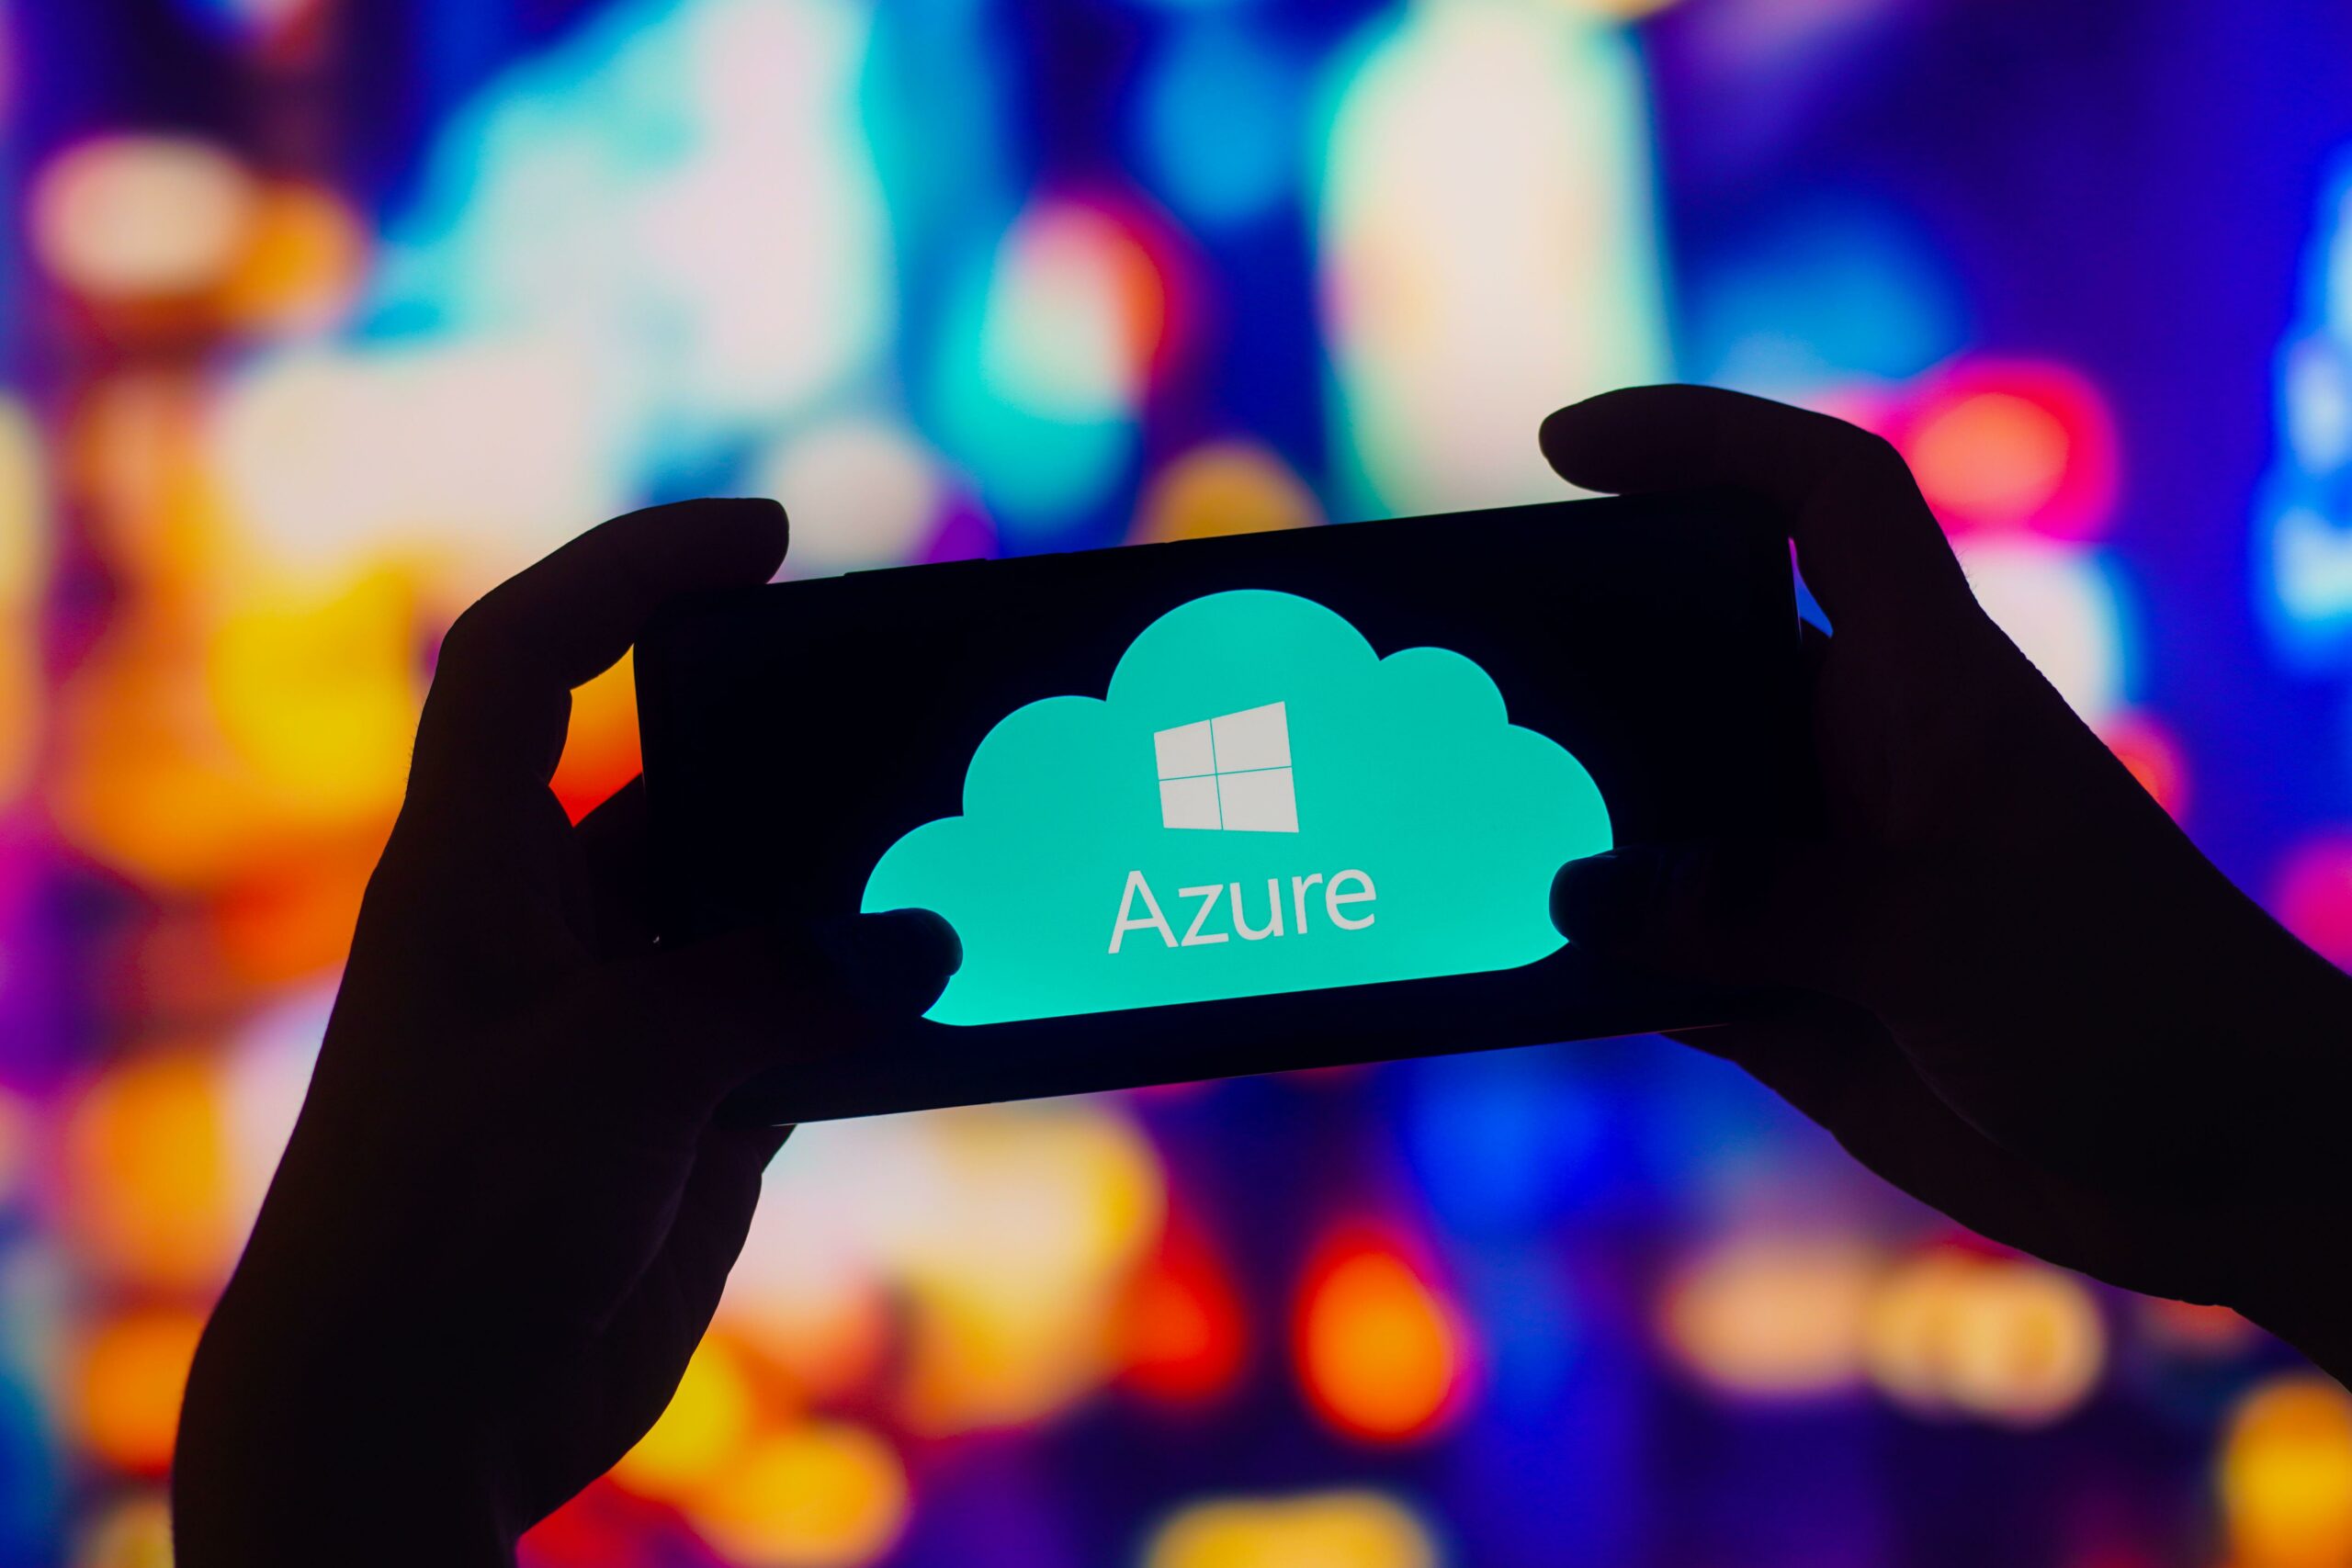 Microsoft Azure Shared Key Misconfiguration Could Lead to RCE